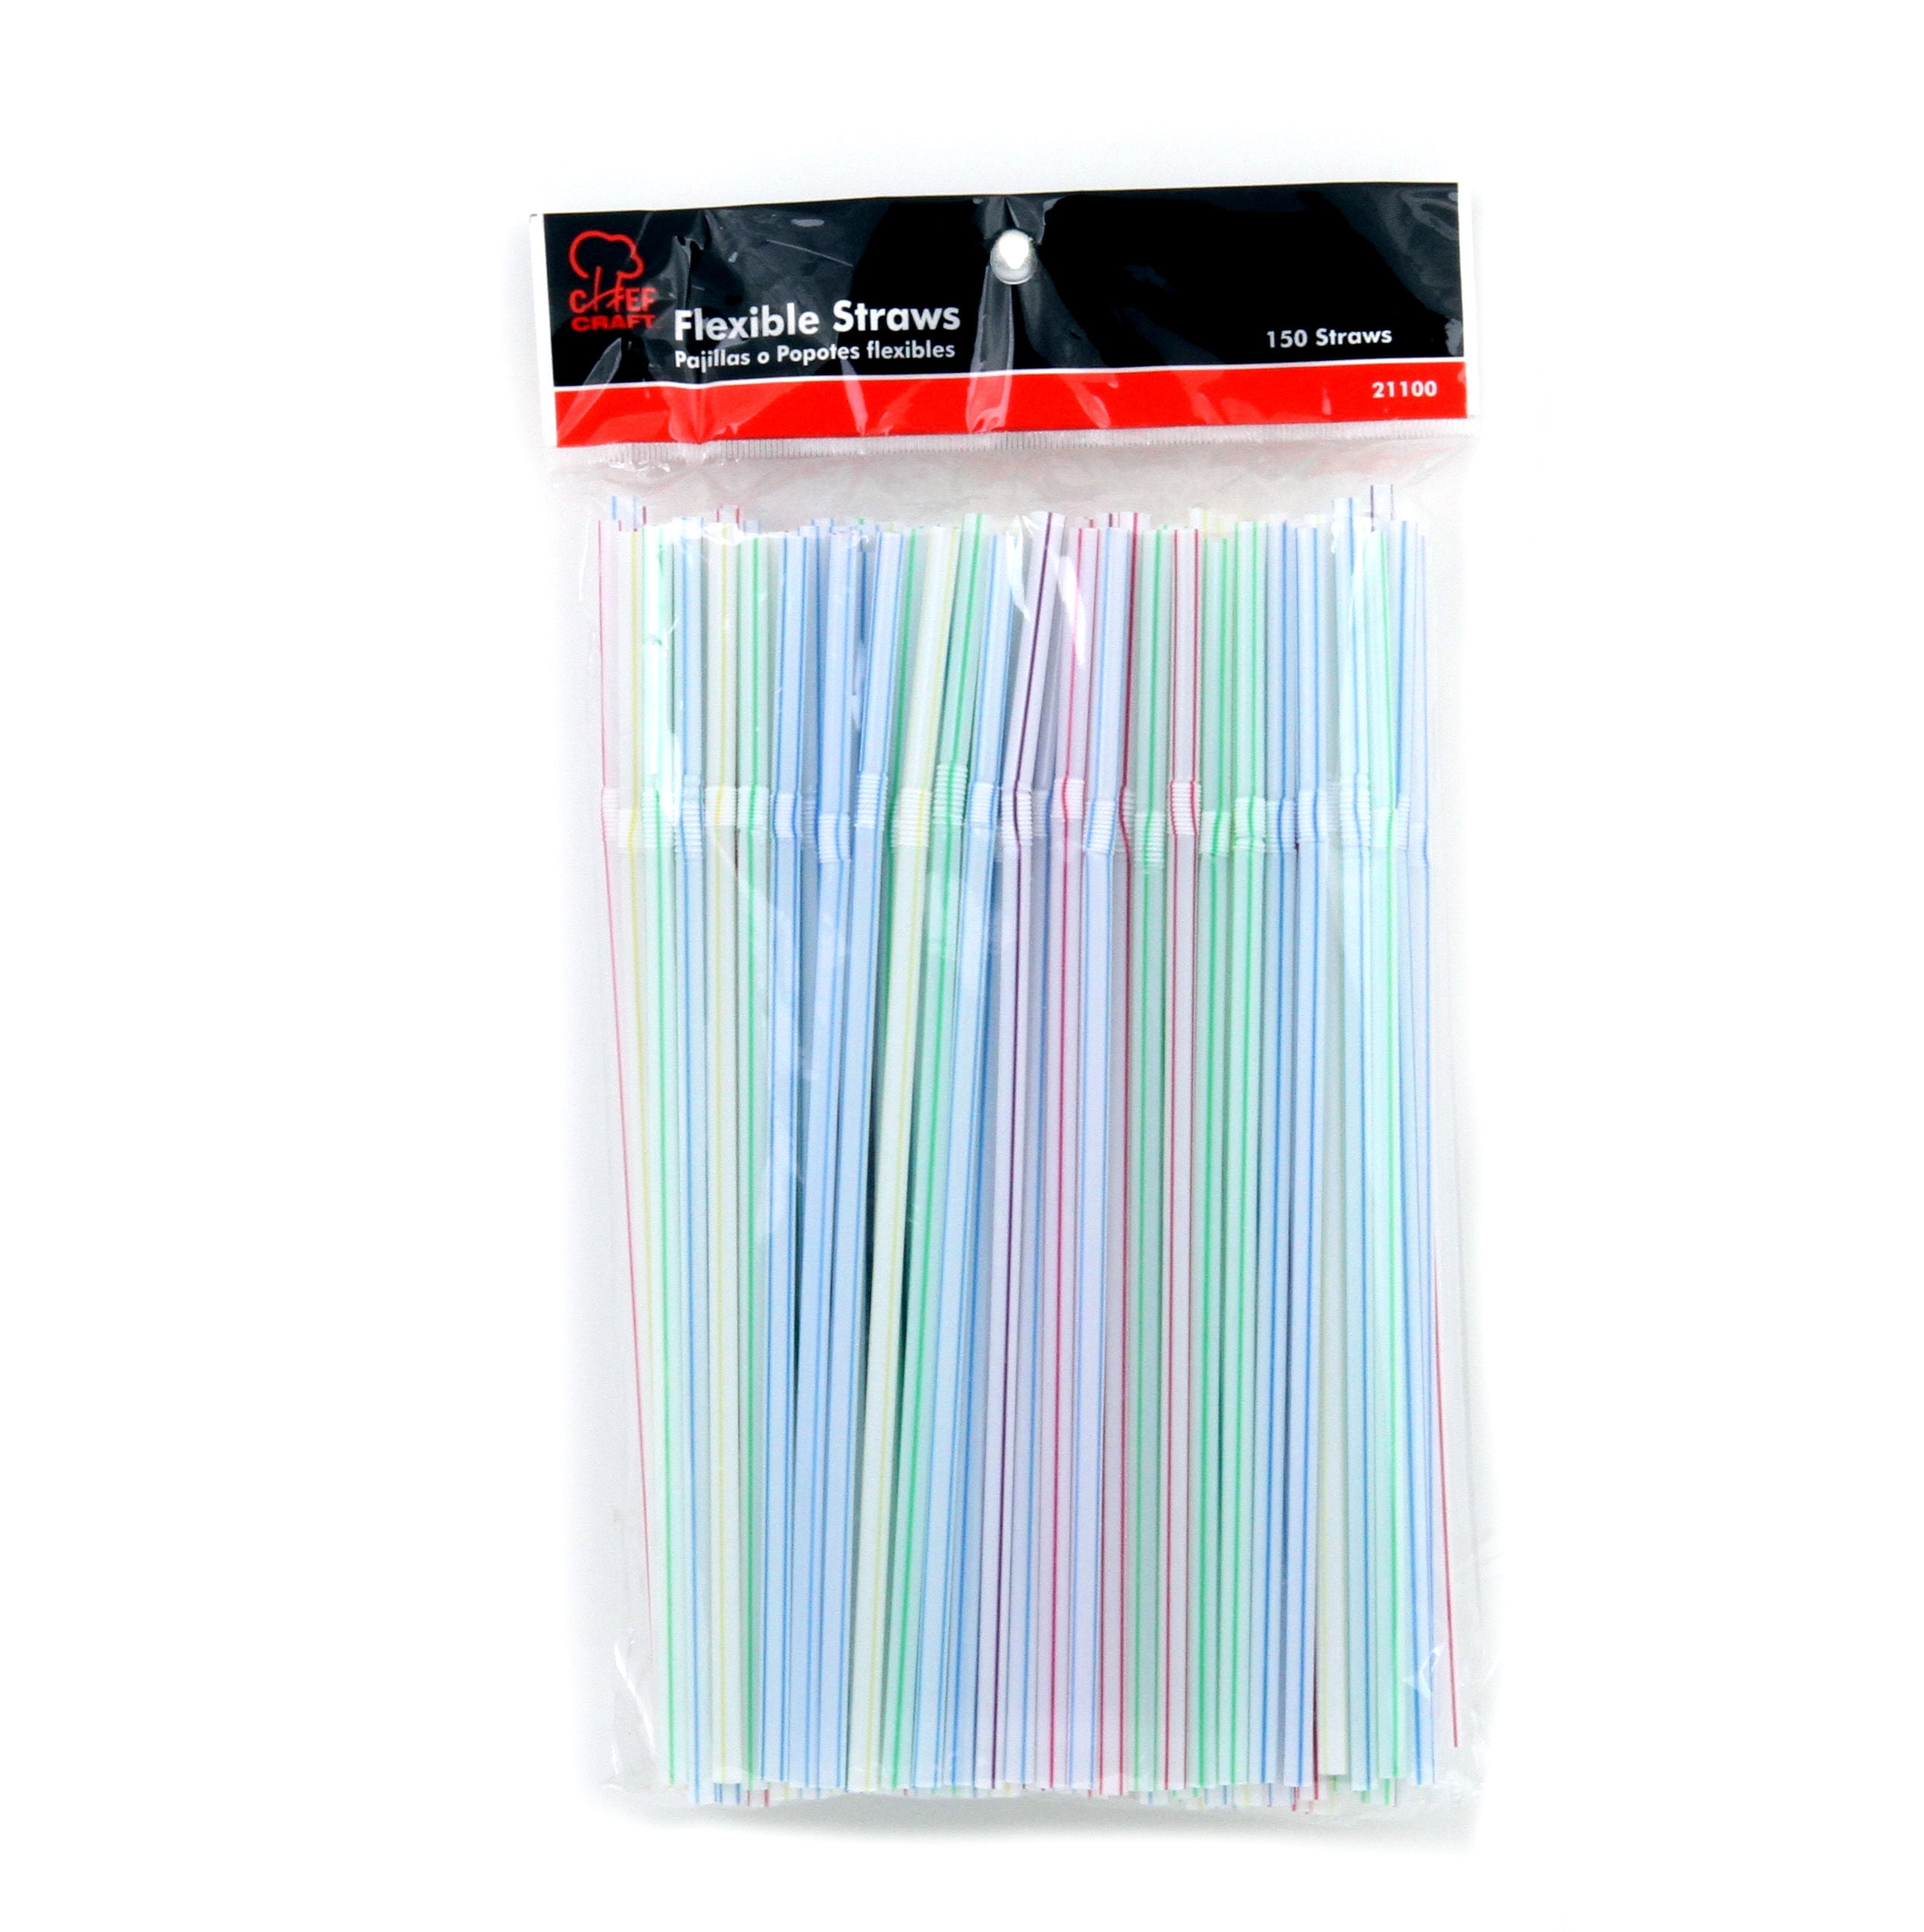 150 PARTY Drinking STRAWS Bendable Flexible Plastic Bendy Straw Assorted Color 